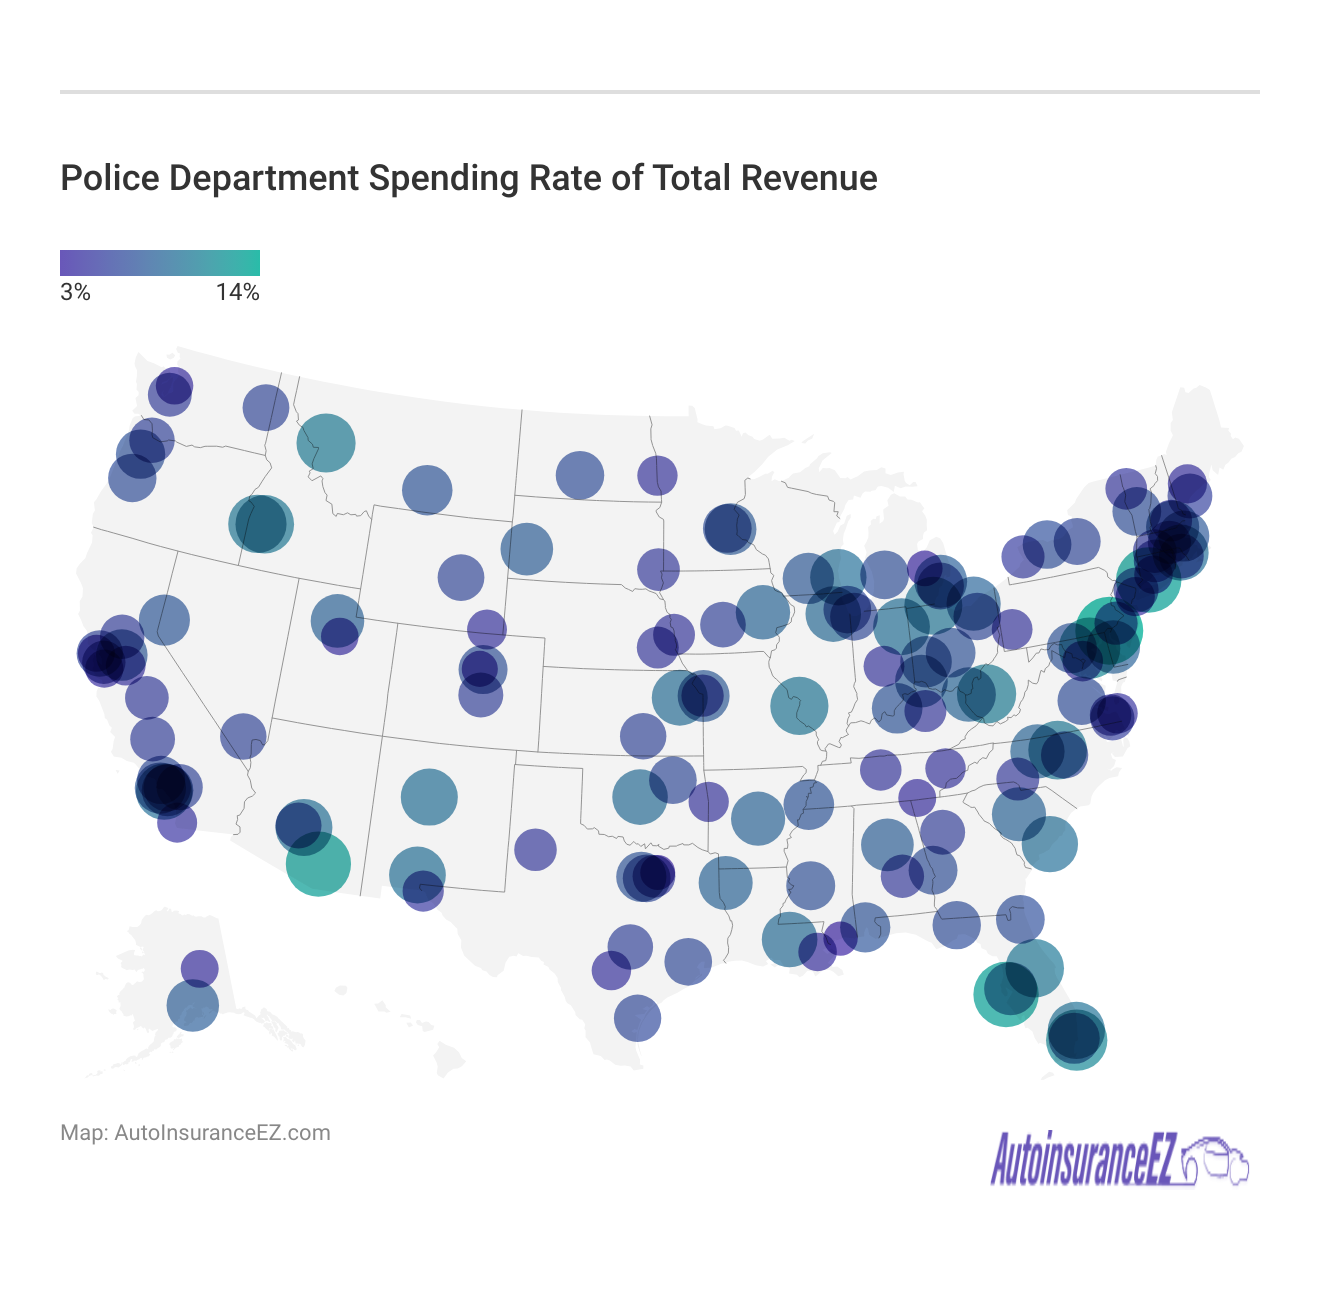 <h3>Police Department Spending Rate of Total Revenue</h3>